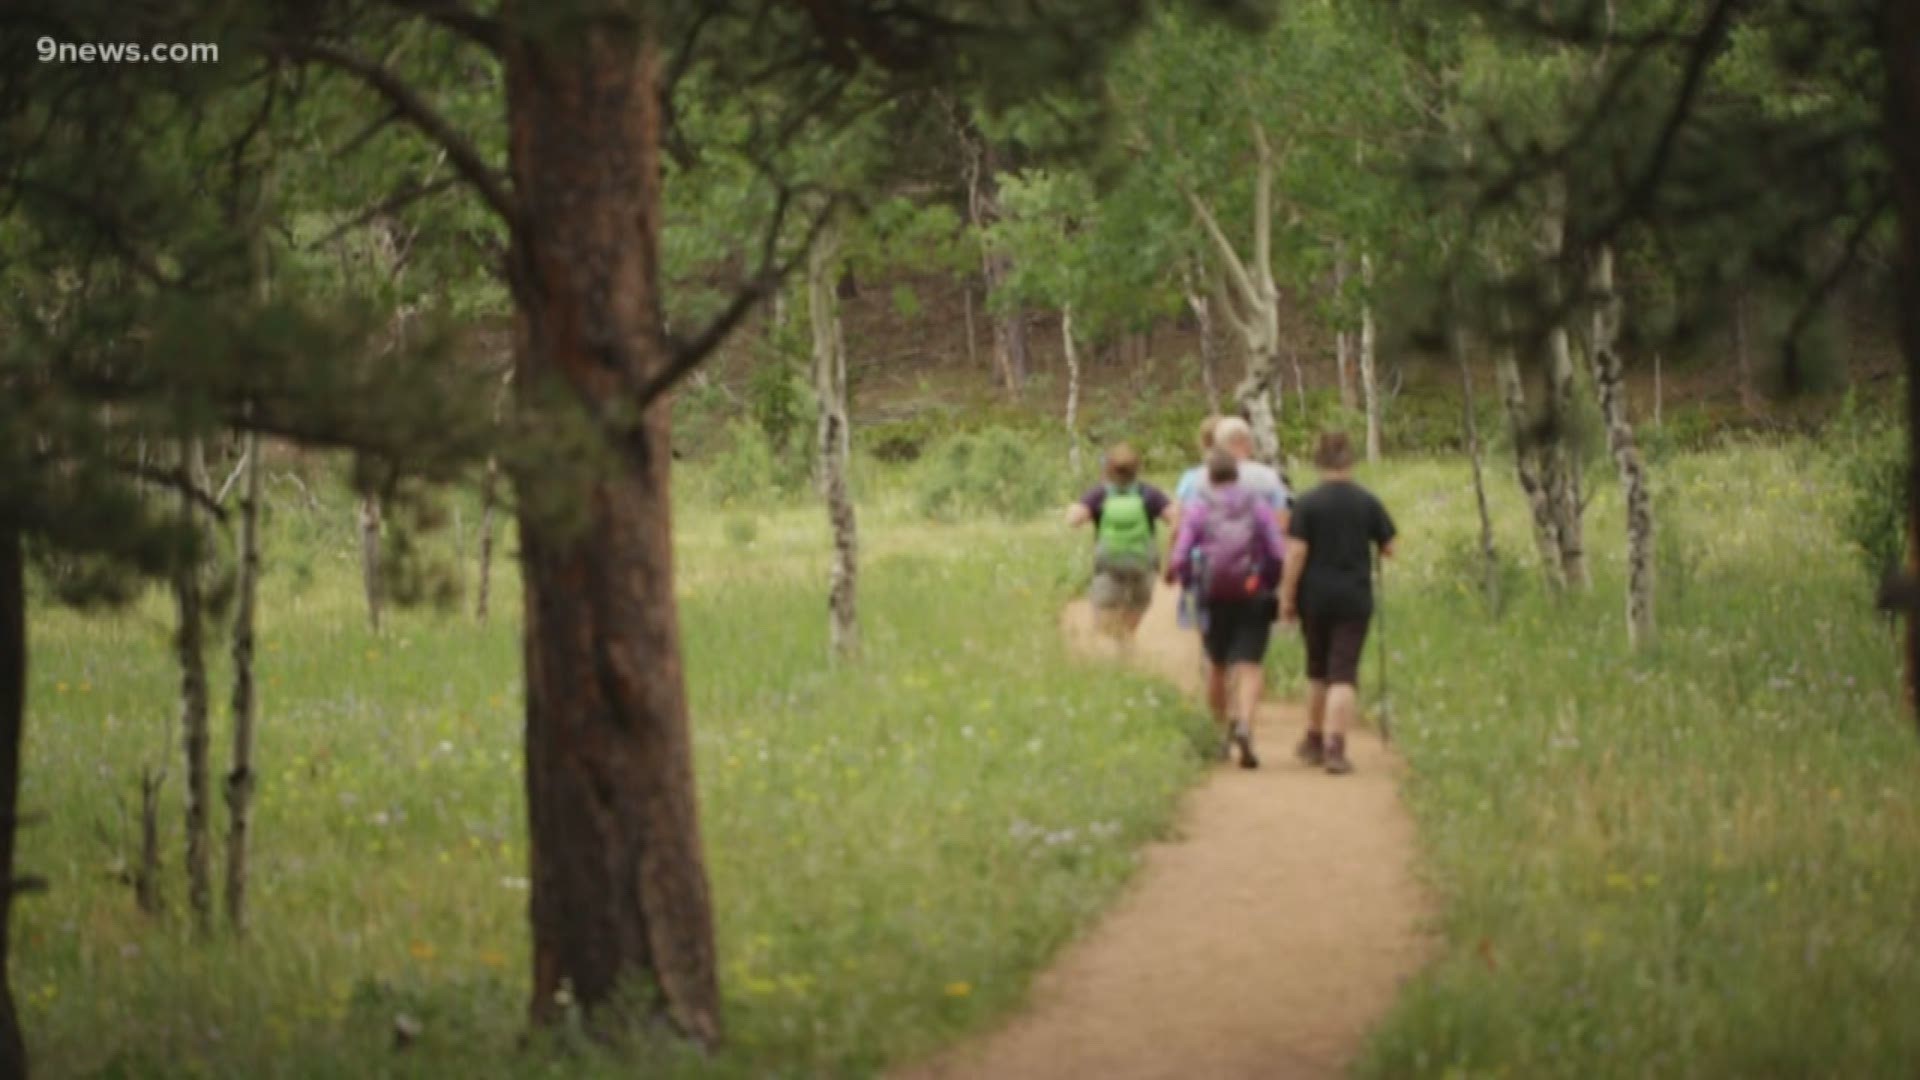 Photojournalist Chris Hansen tags along with a group of seniors on a hike in Boulder County.